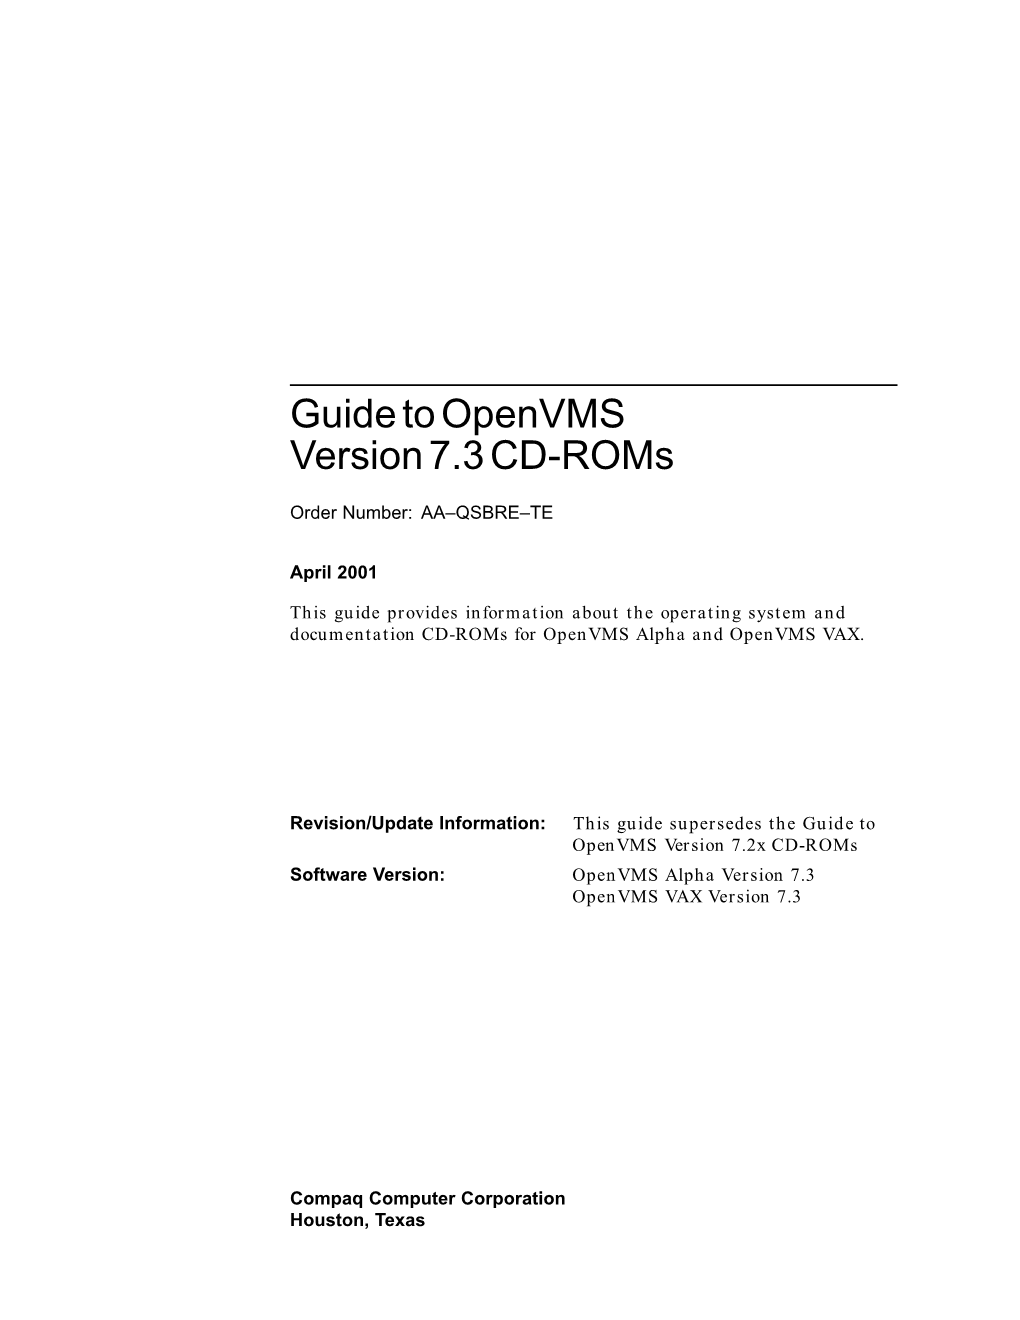 Guide to Openvms Version 7.3 CD-Roms